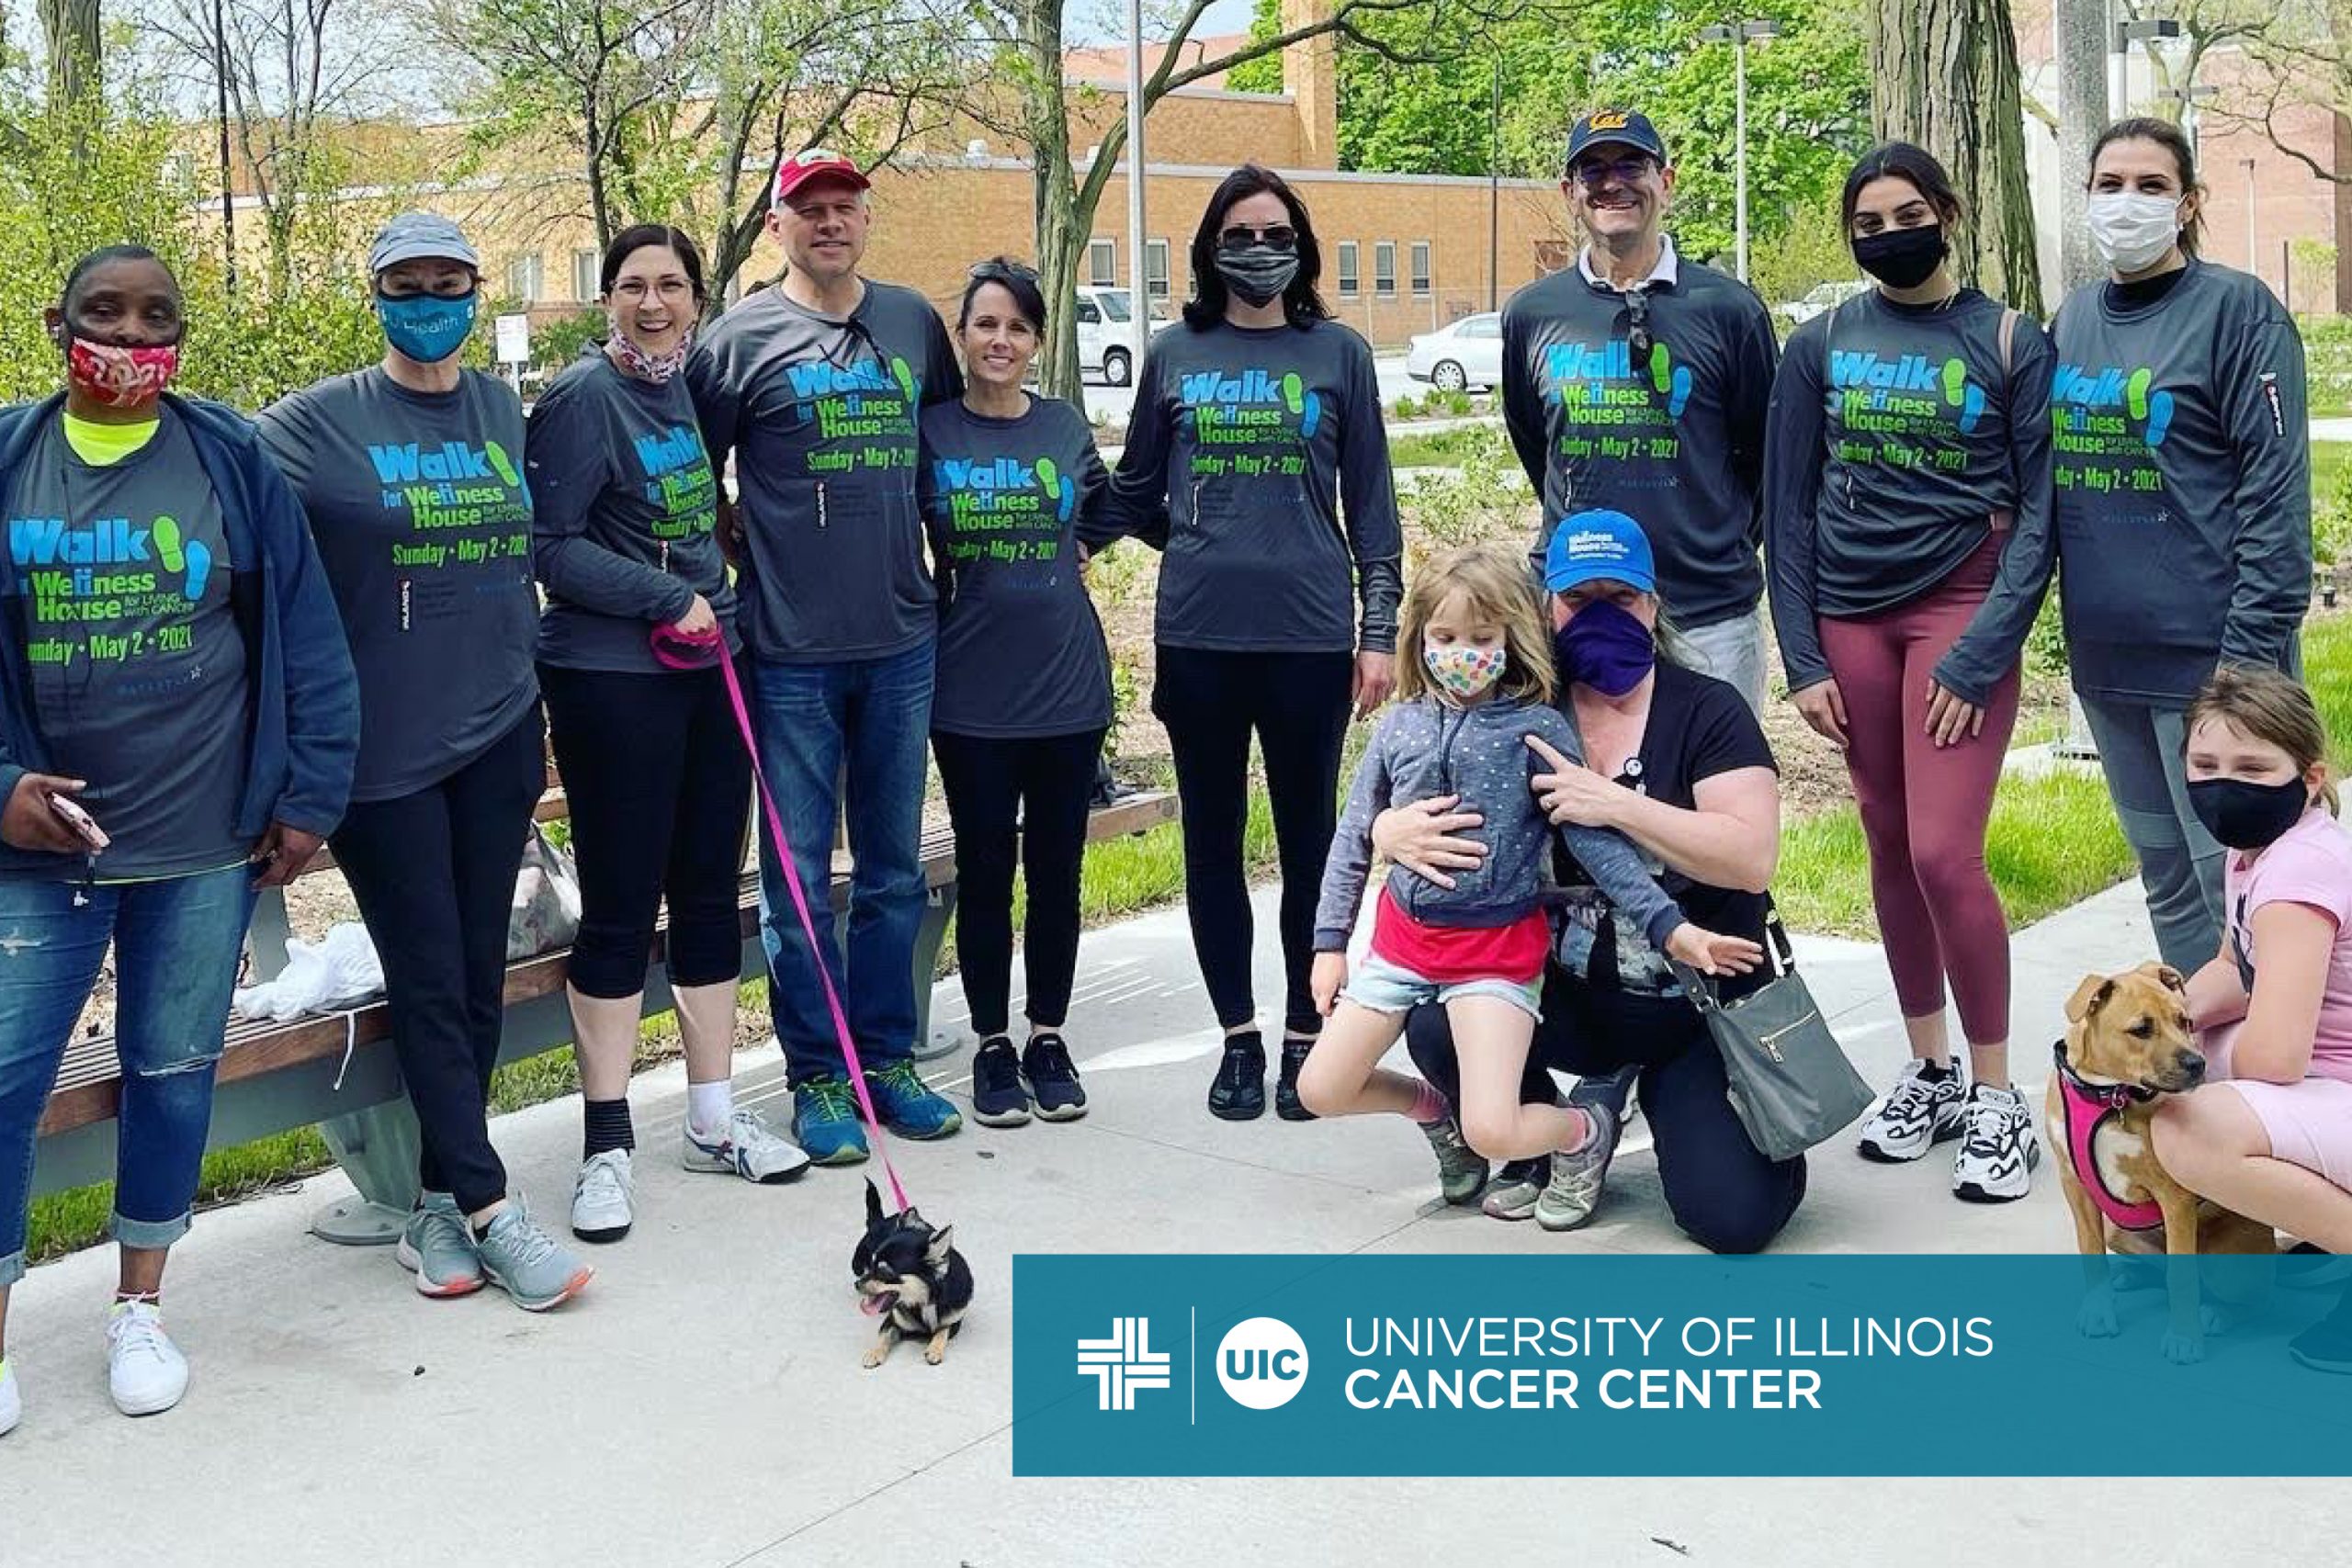 Photo of the Walk for Wellness House team and the University of Illinois Cancer Center logo